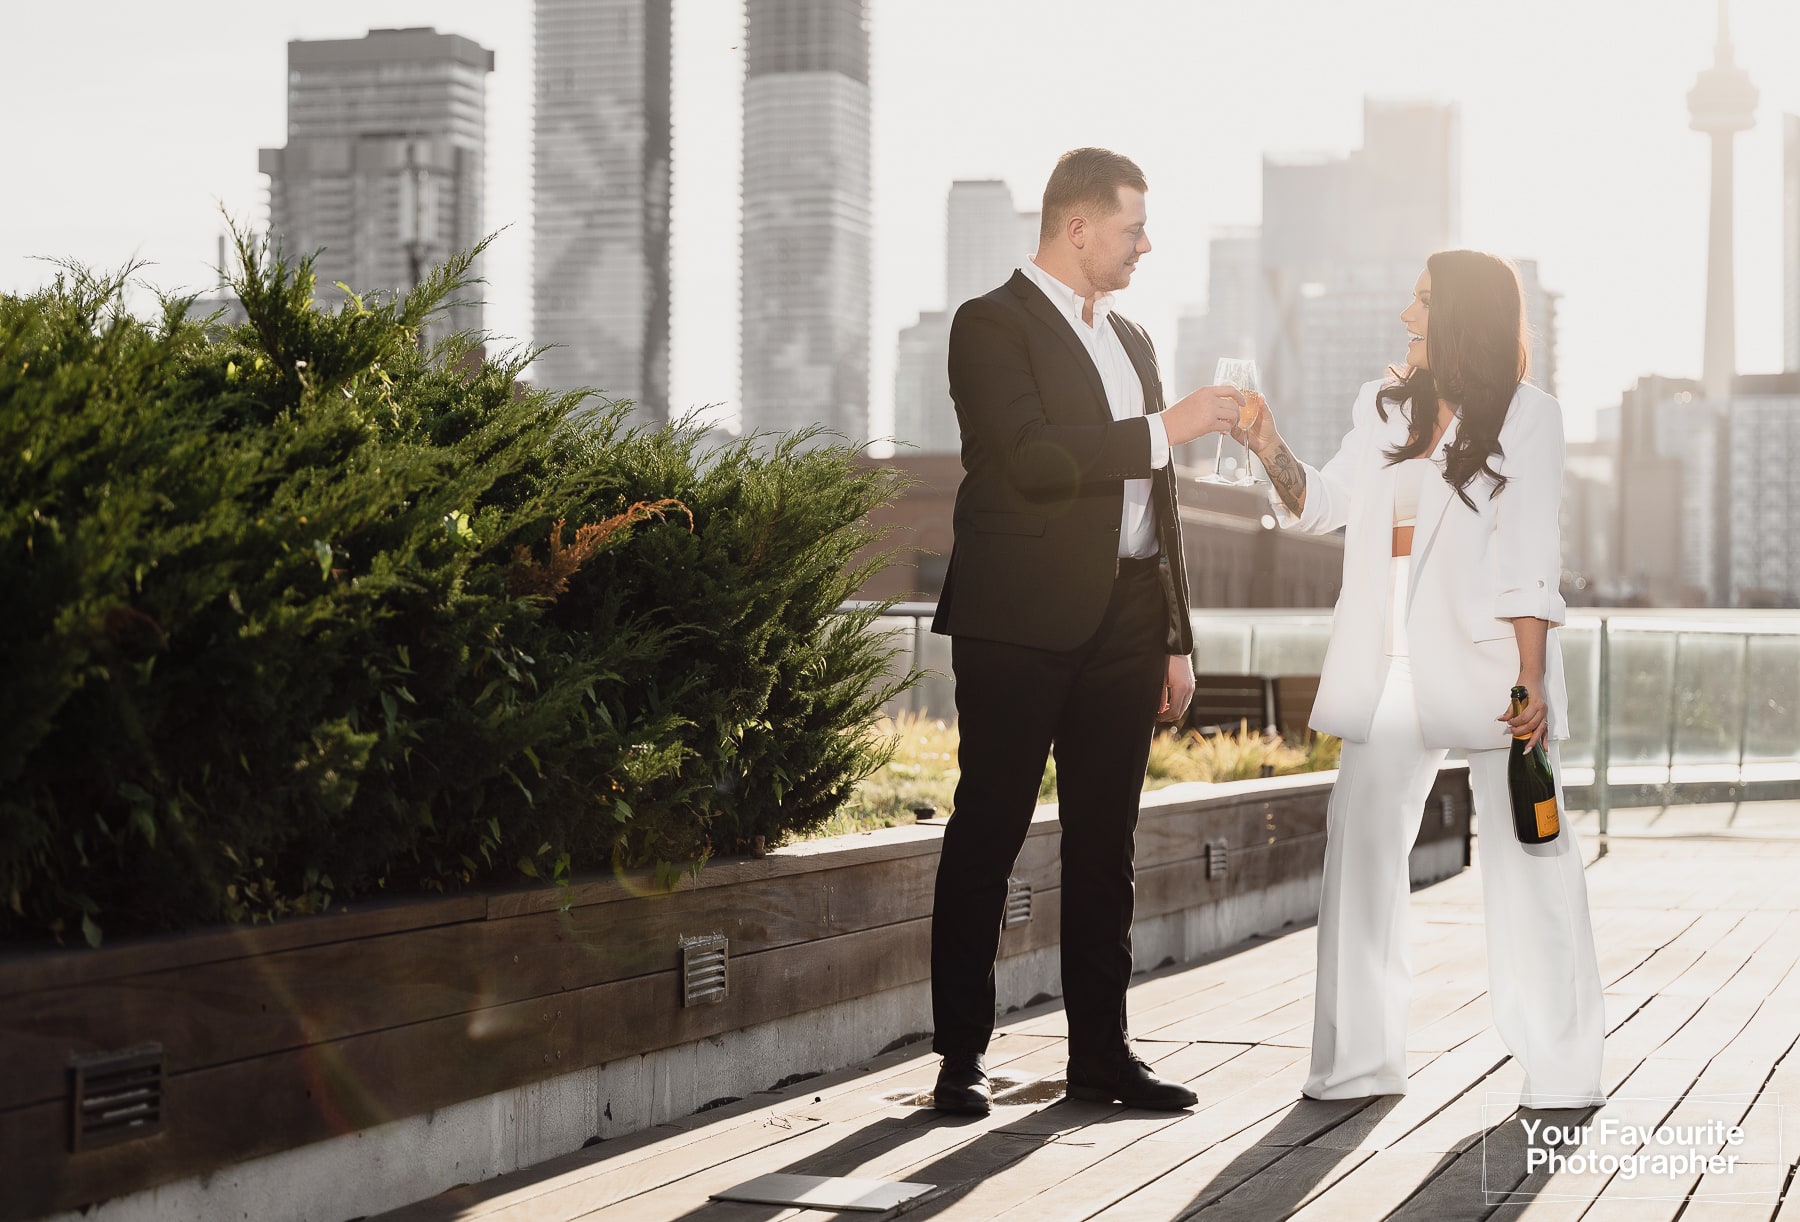 Sam and Rob celebrate their engagement with a champagne photo shoot on a downtown Toronto rooftop in the Distillery District